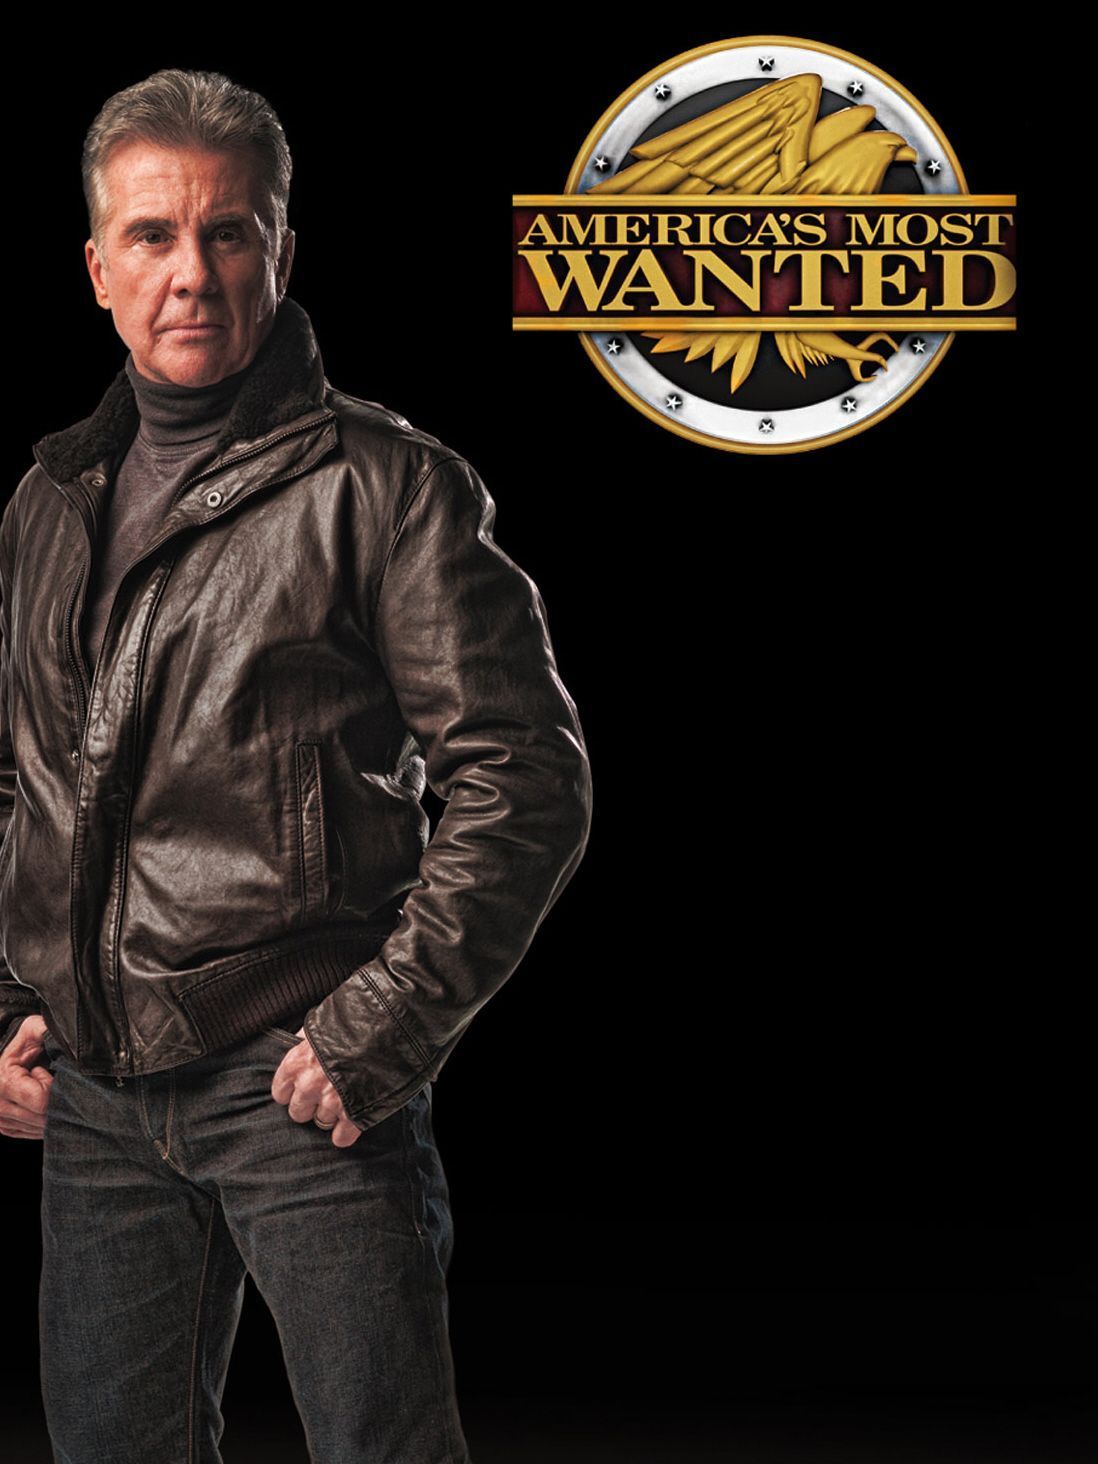 What Ever Happened To 'America's Most Wanted'?